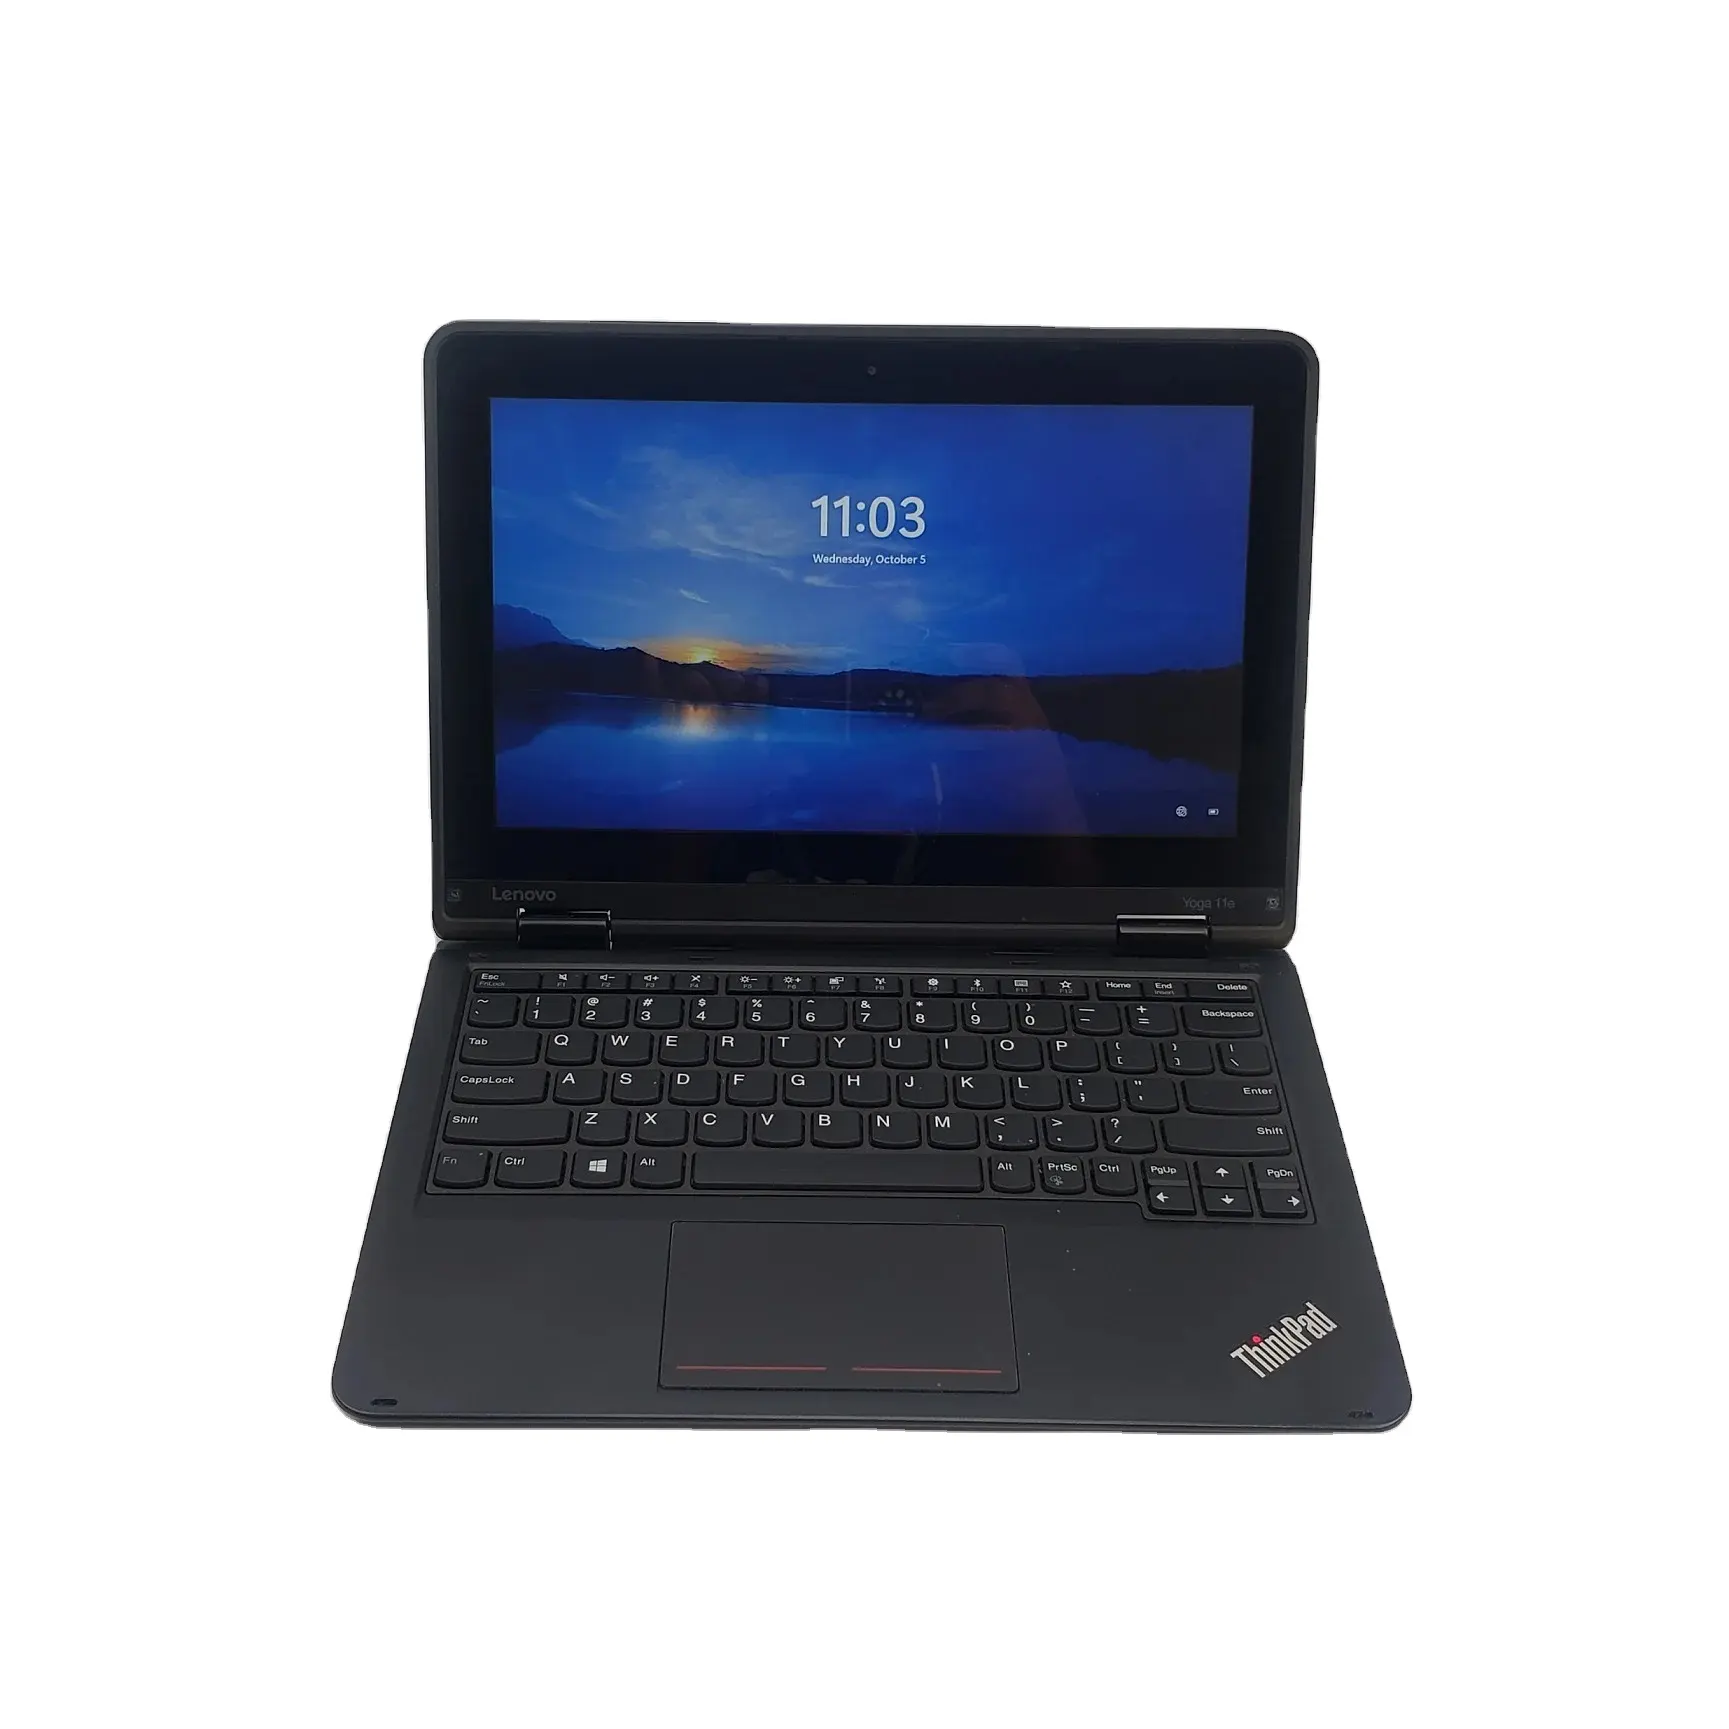 Best Prices Pre Owned Yoga 11e 4th Gen Intel Celeron N3450 4GB RAM 128GB SSD NO OS Available from US Exporter